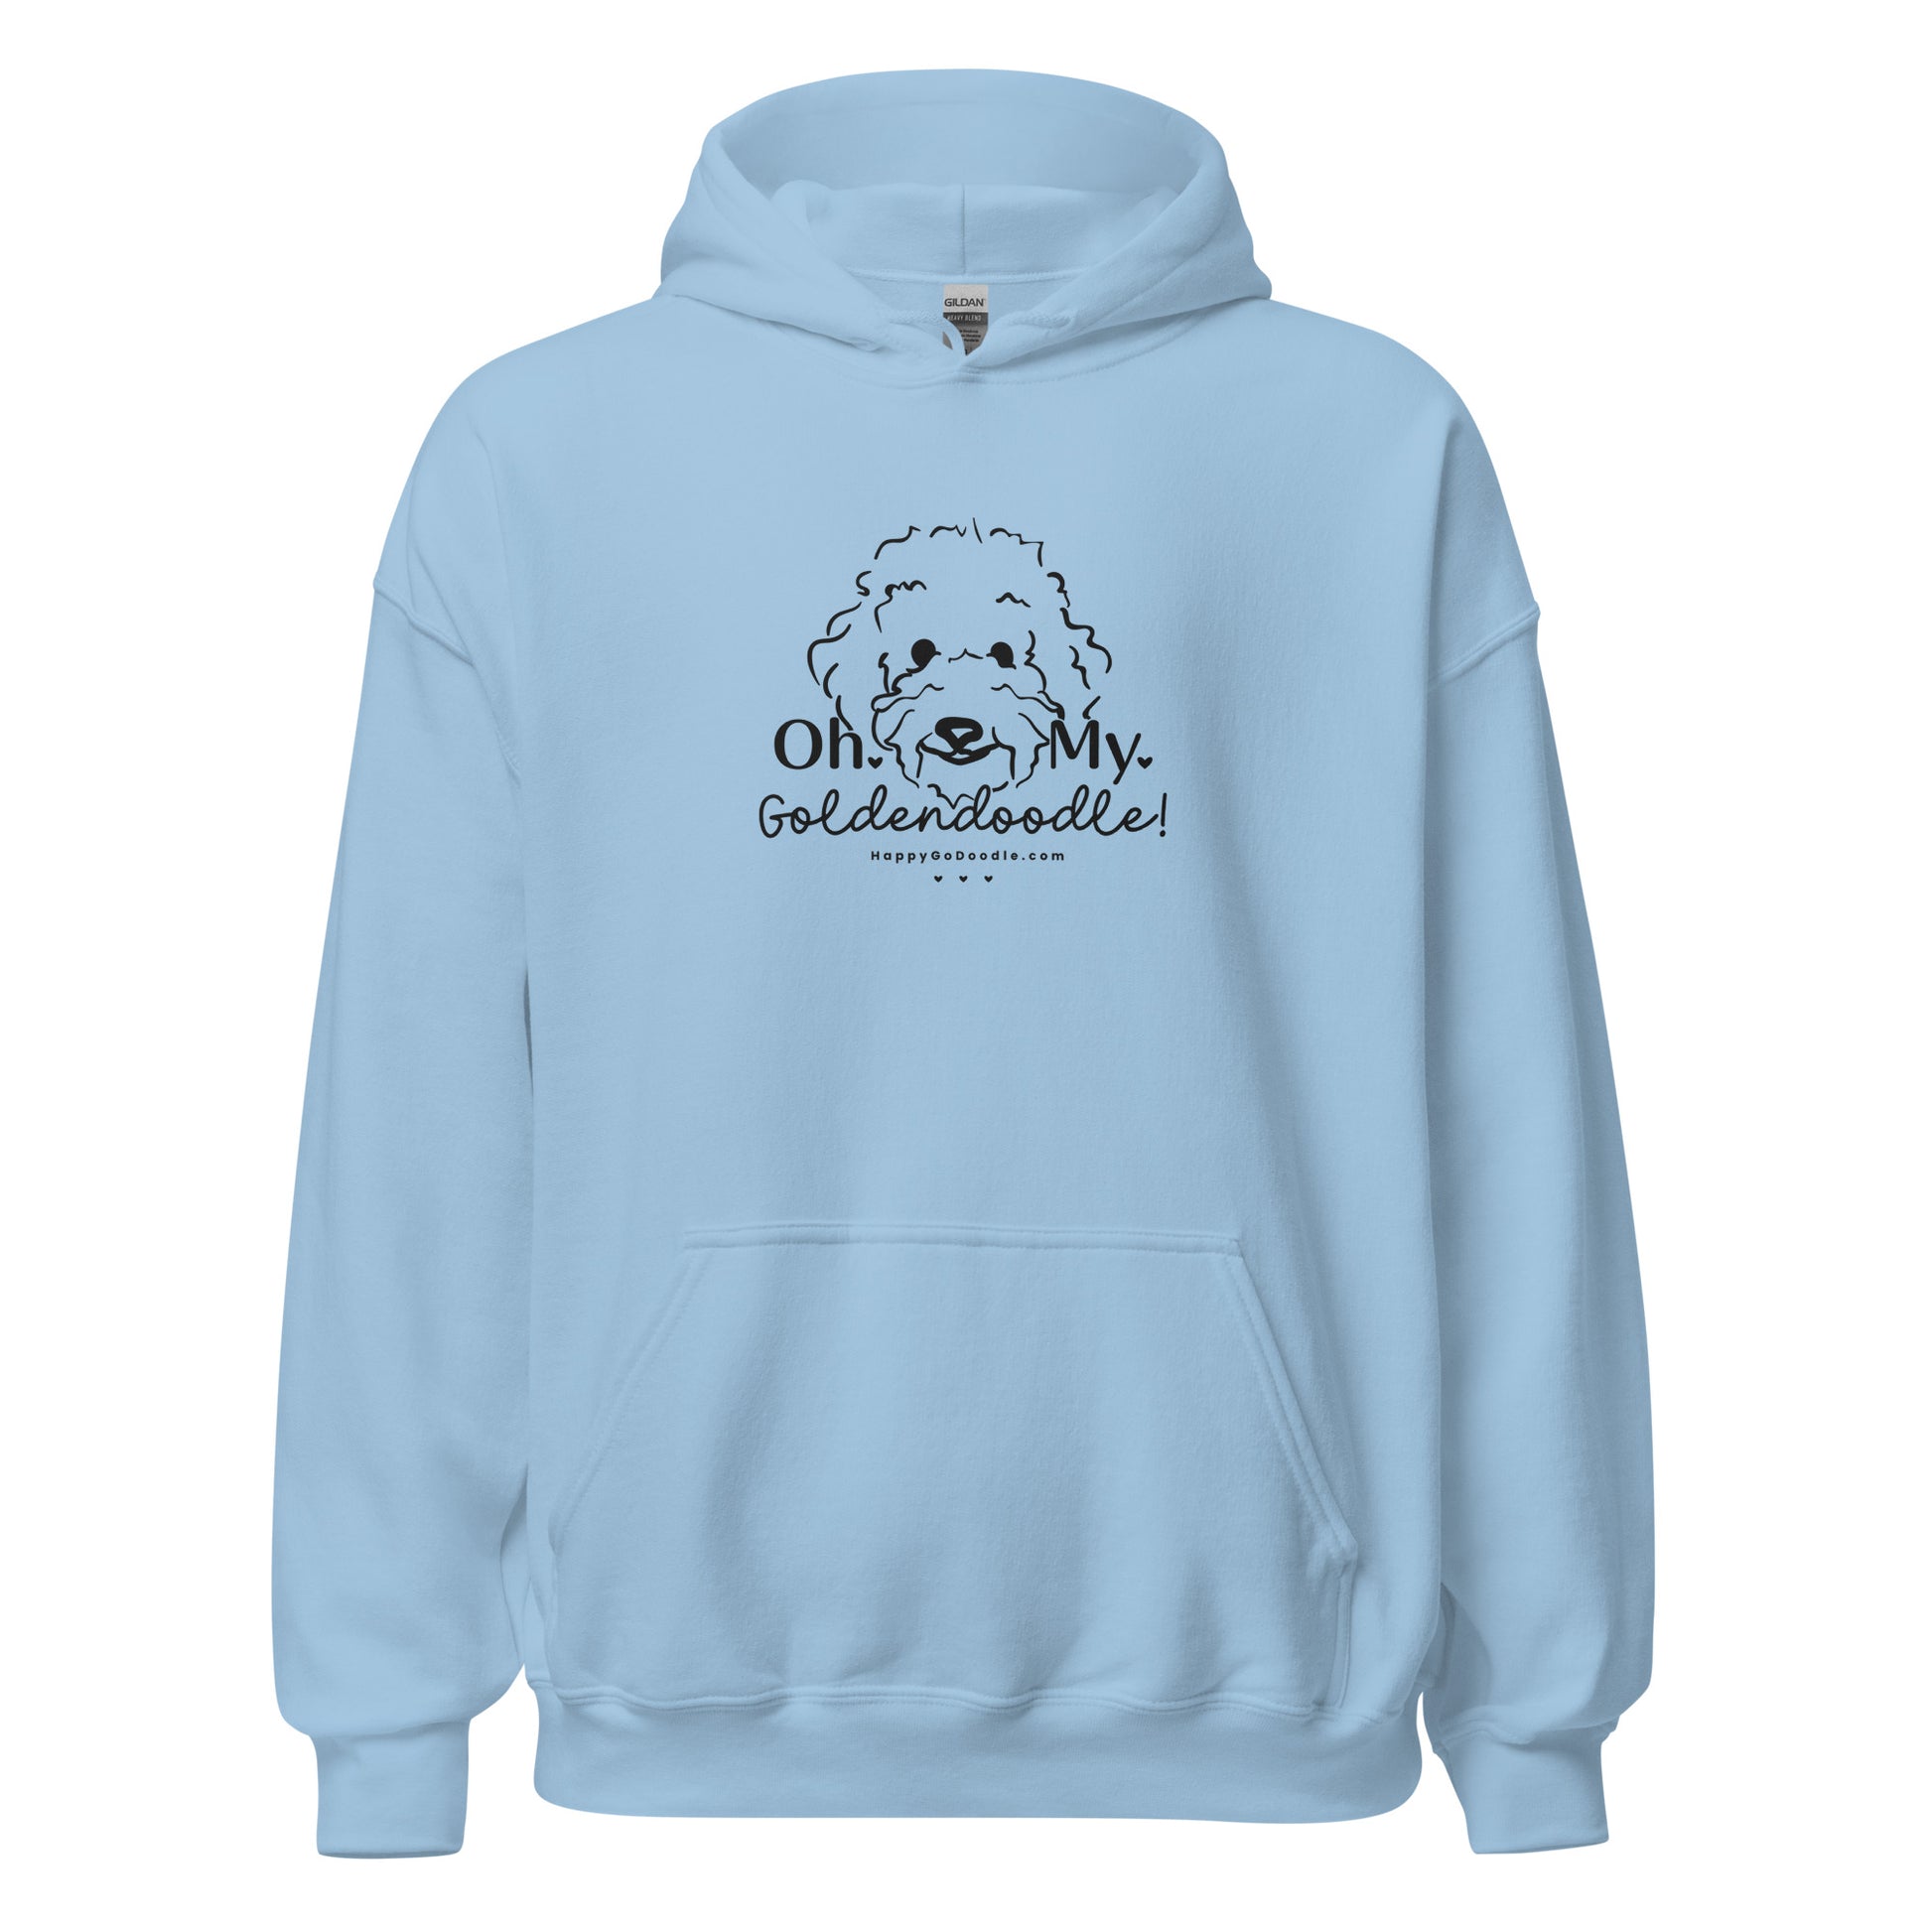 Goldendoodle hoodie with Goldendoodle face and words "Oh My Goldendoodle" in light blue  color